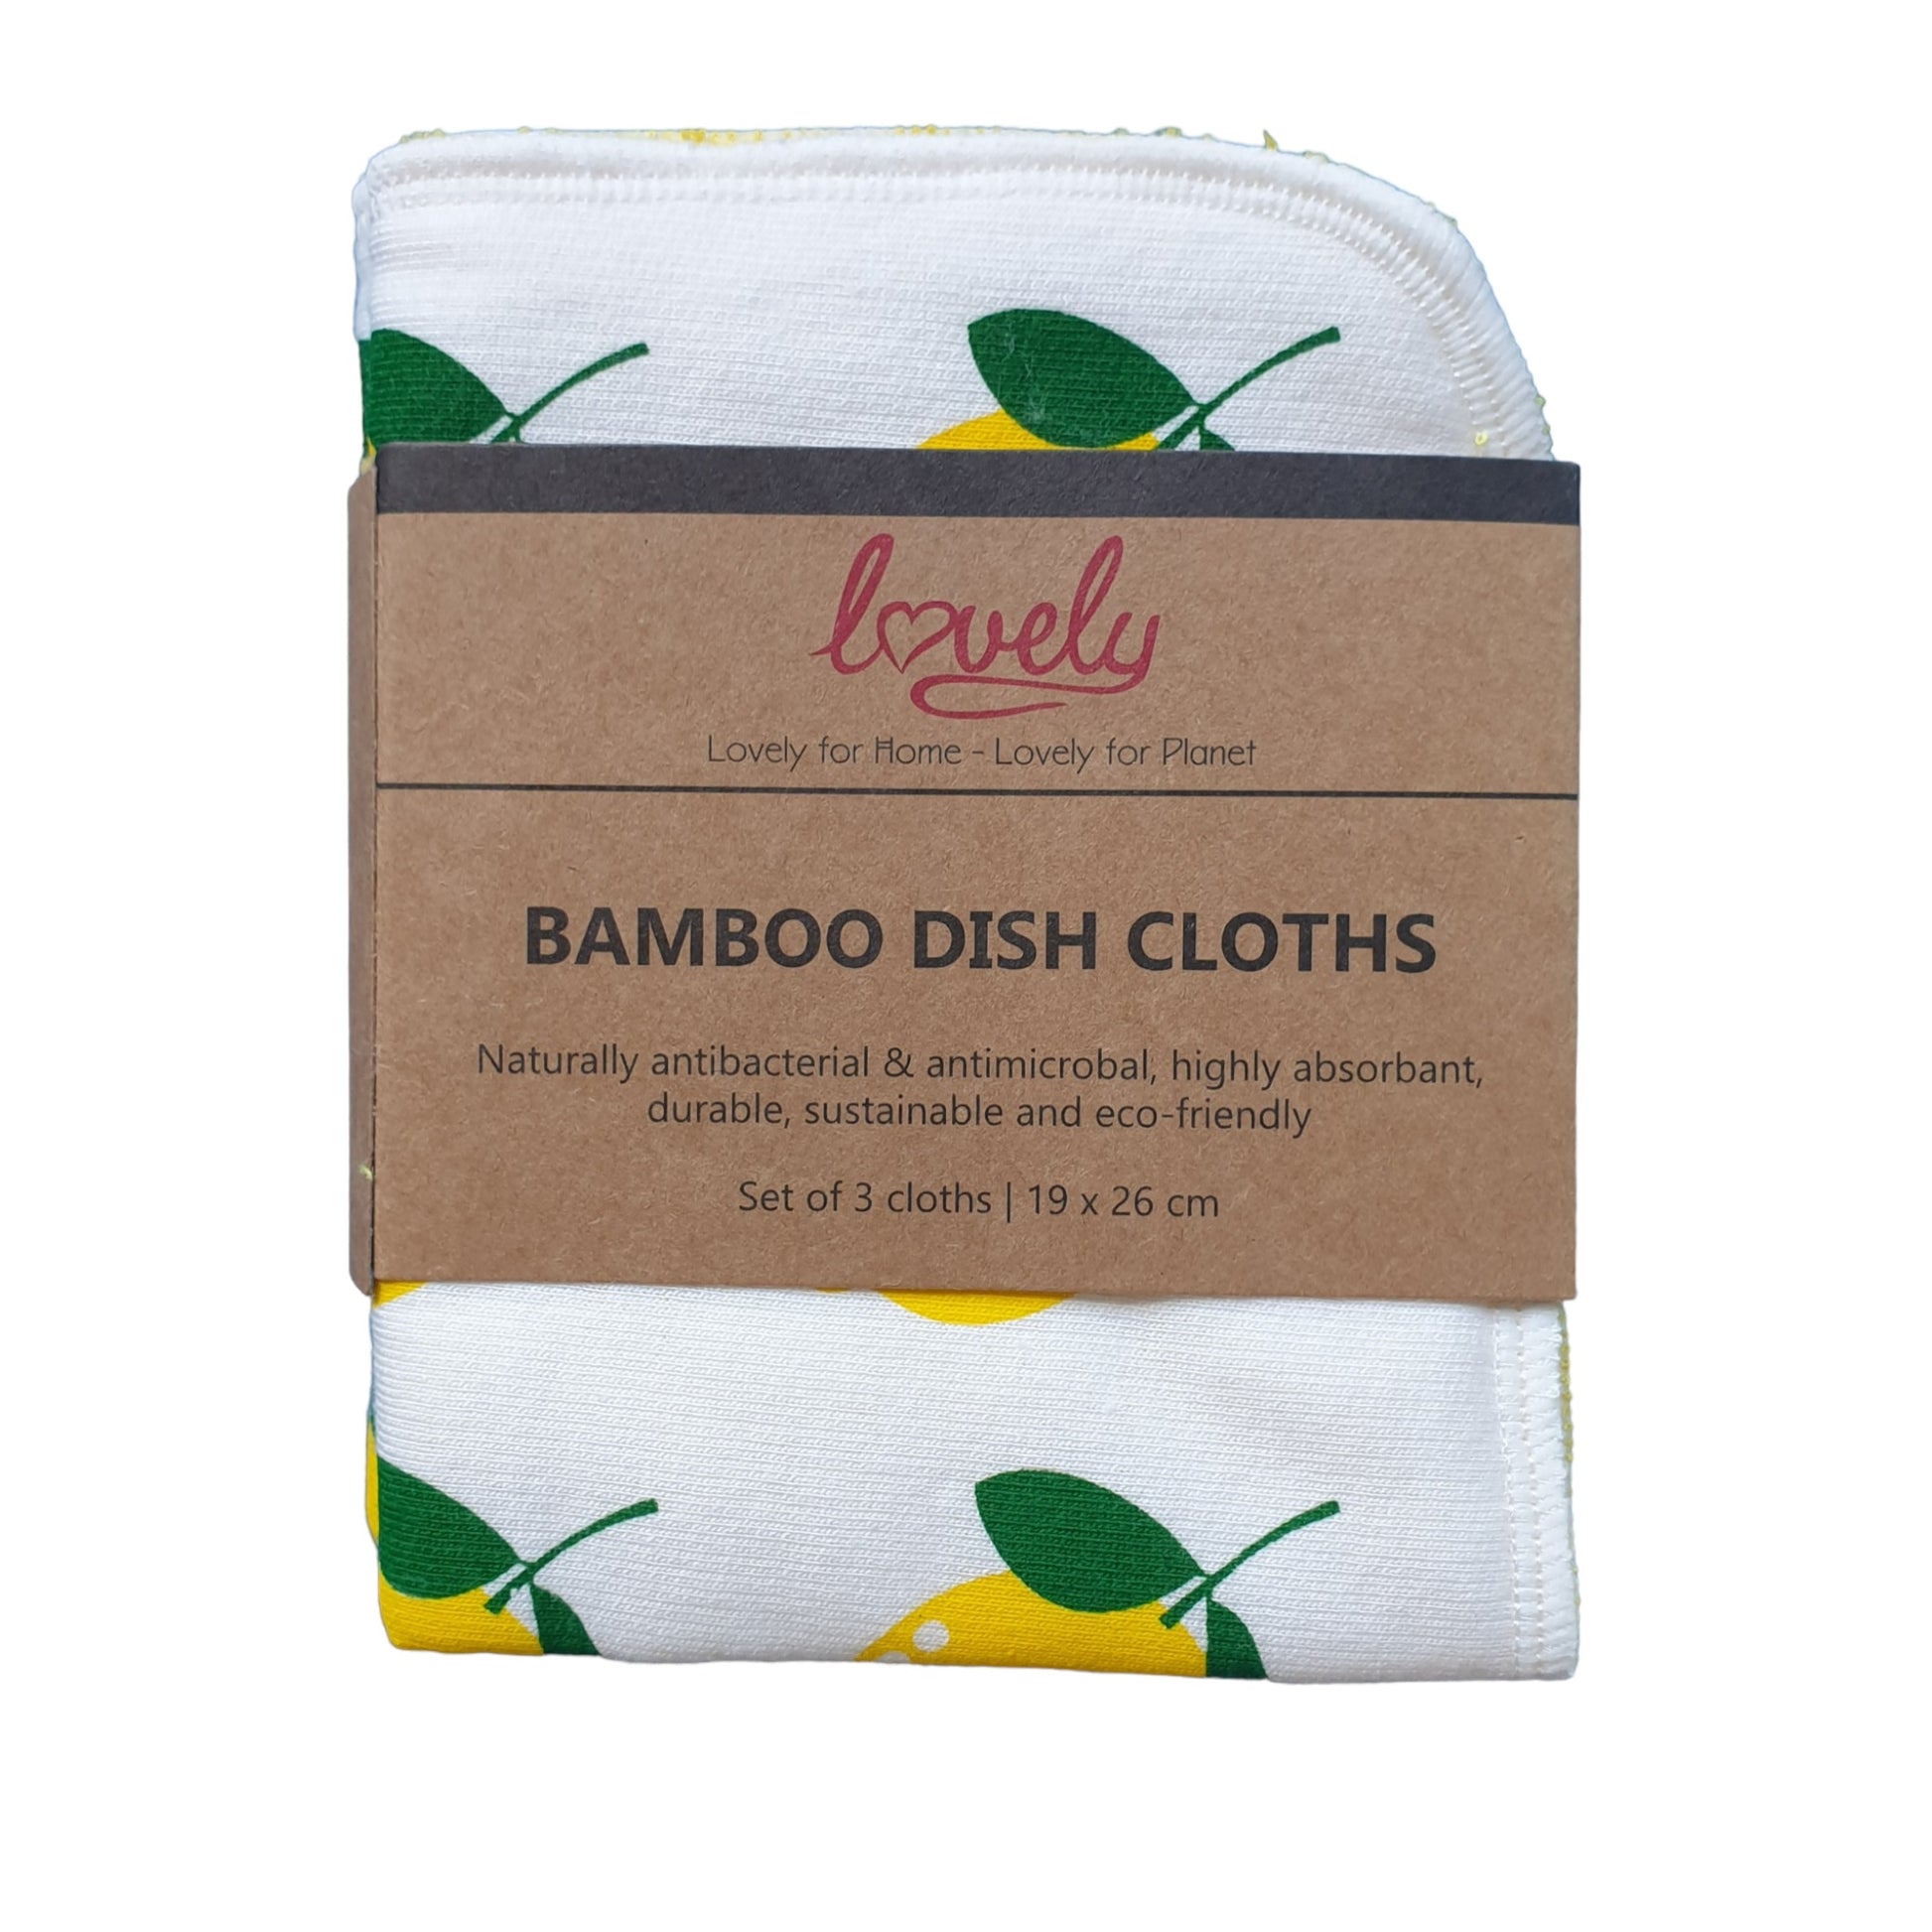 Lovely for Planet bamboo dishcloth, highly absorbent and durable, single pack of 3